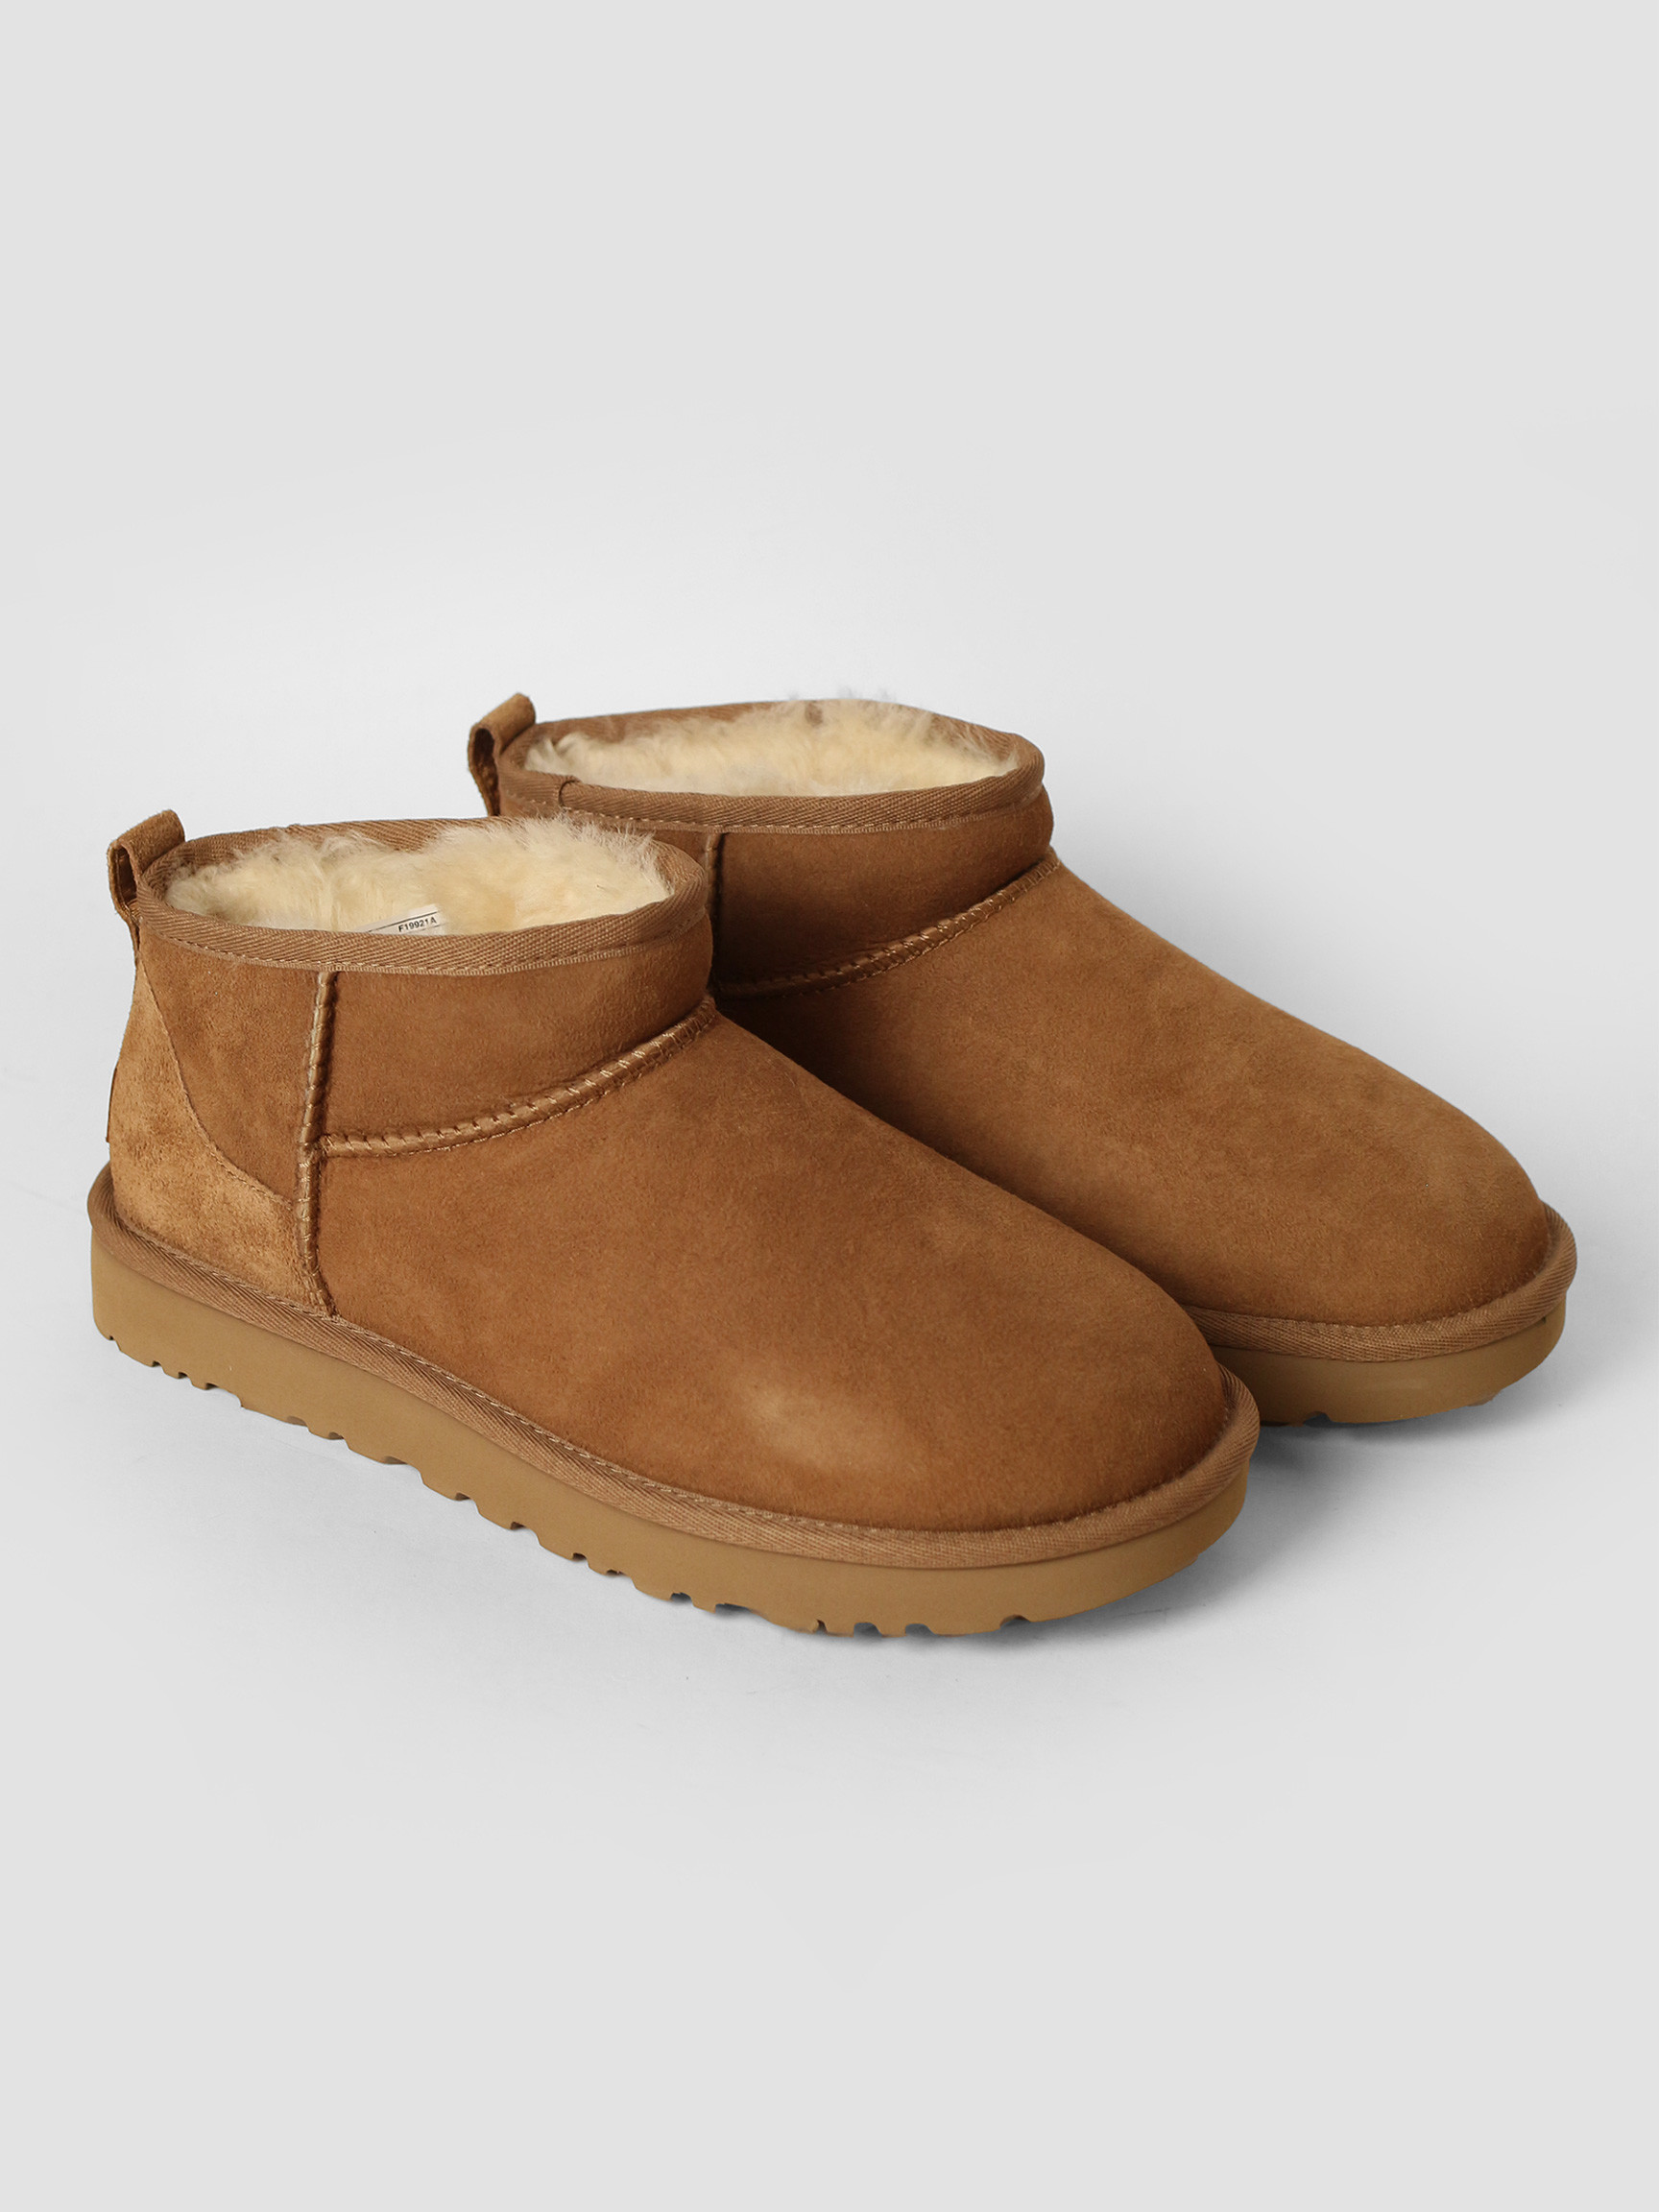 Ministry whiskey paddle UGG | SHOES | BOOTS